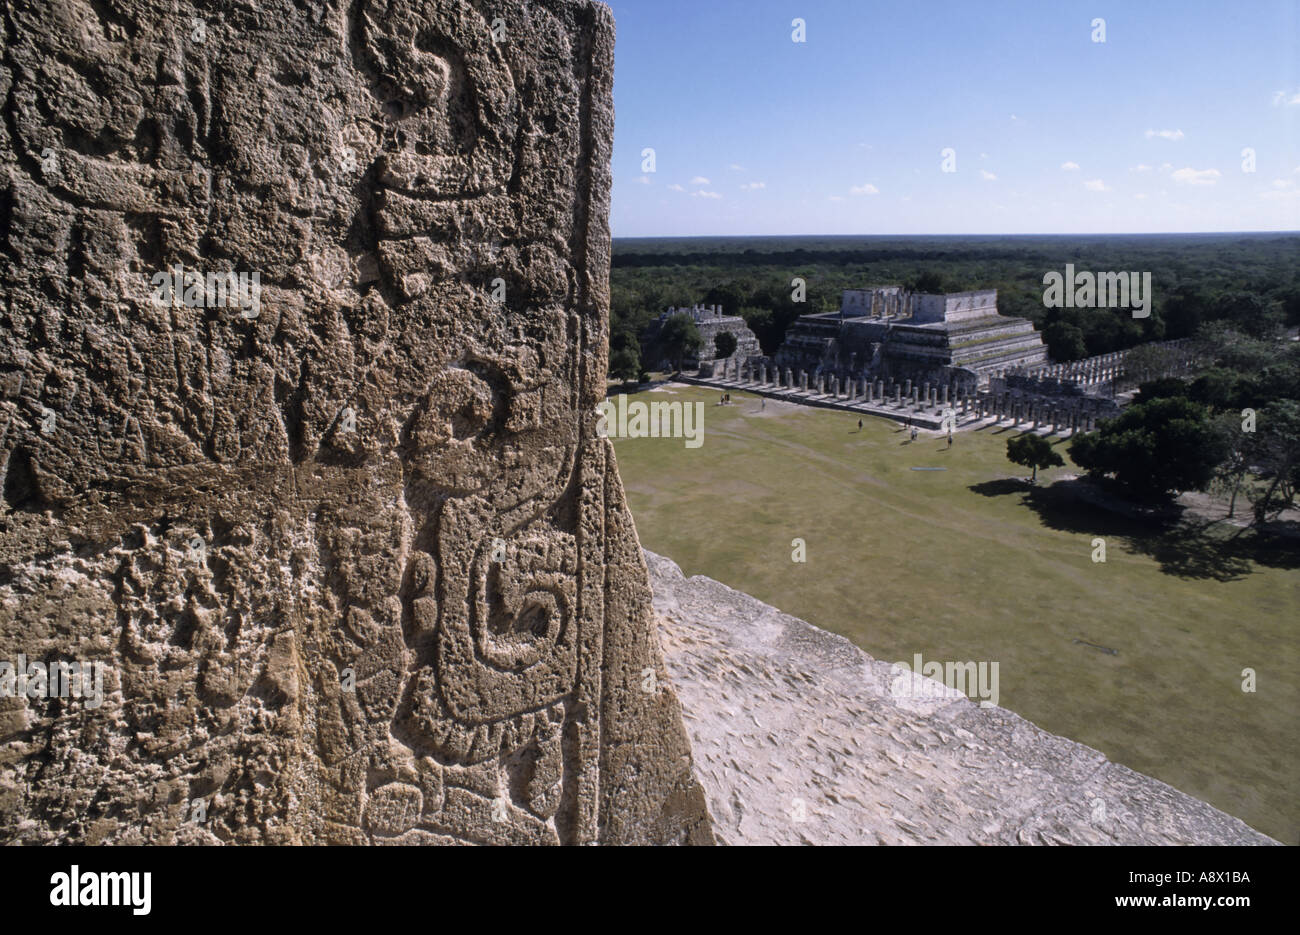 Chichen Itza site from top of the Pyramid Of Kukulcan looking towards the Temple Of A Thousand Warriors with symbols Stock Photo